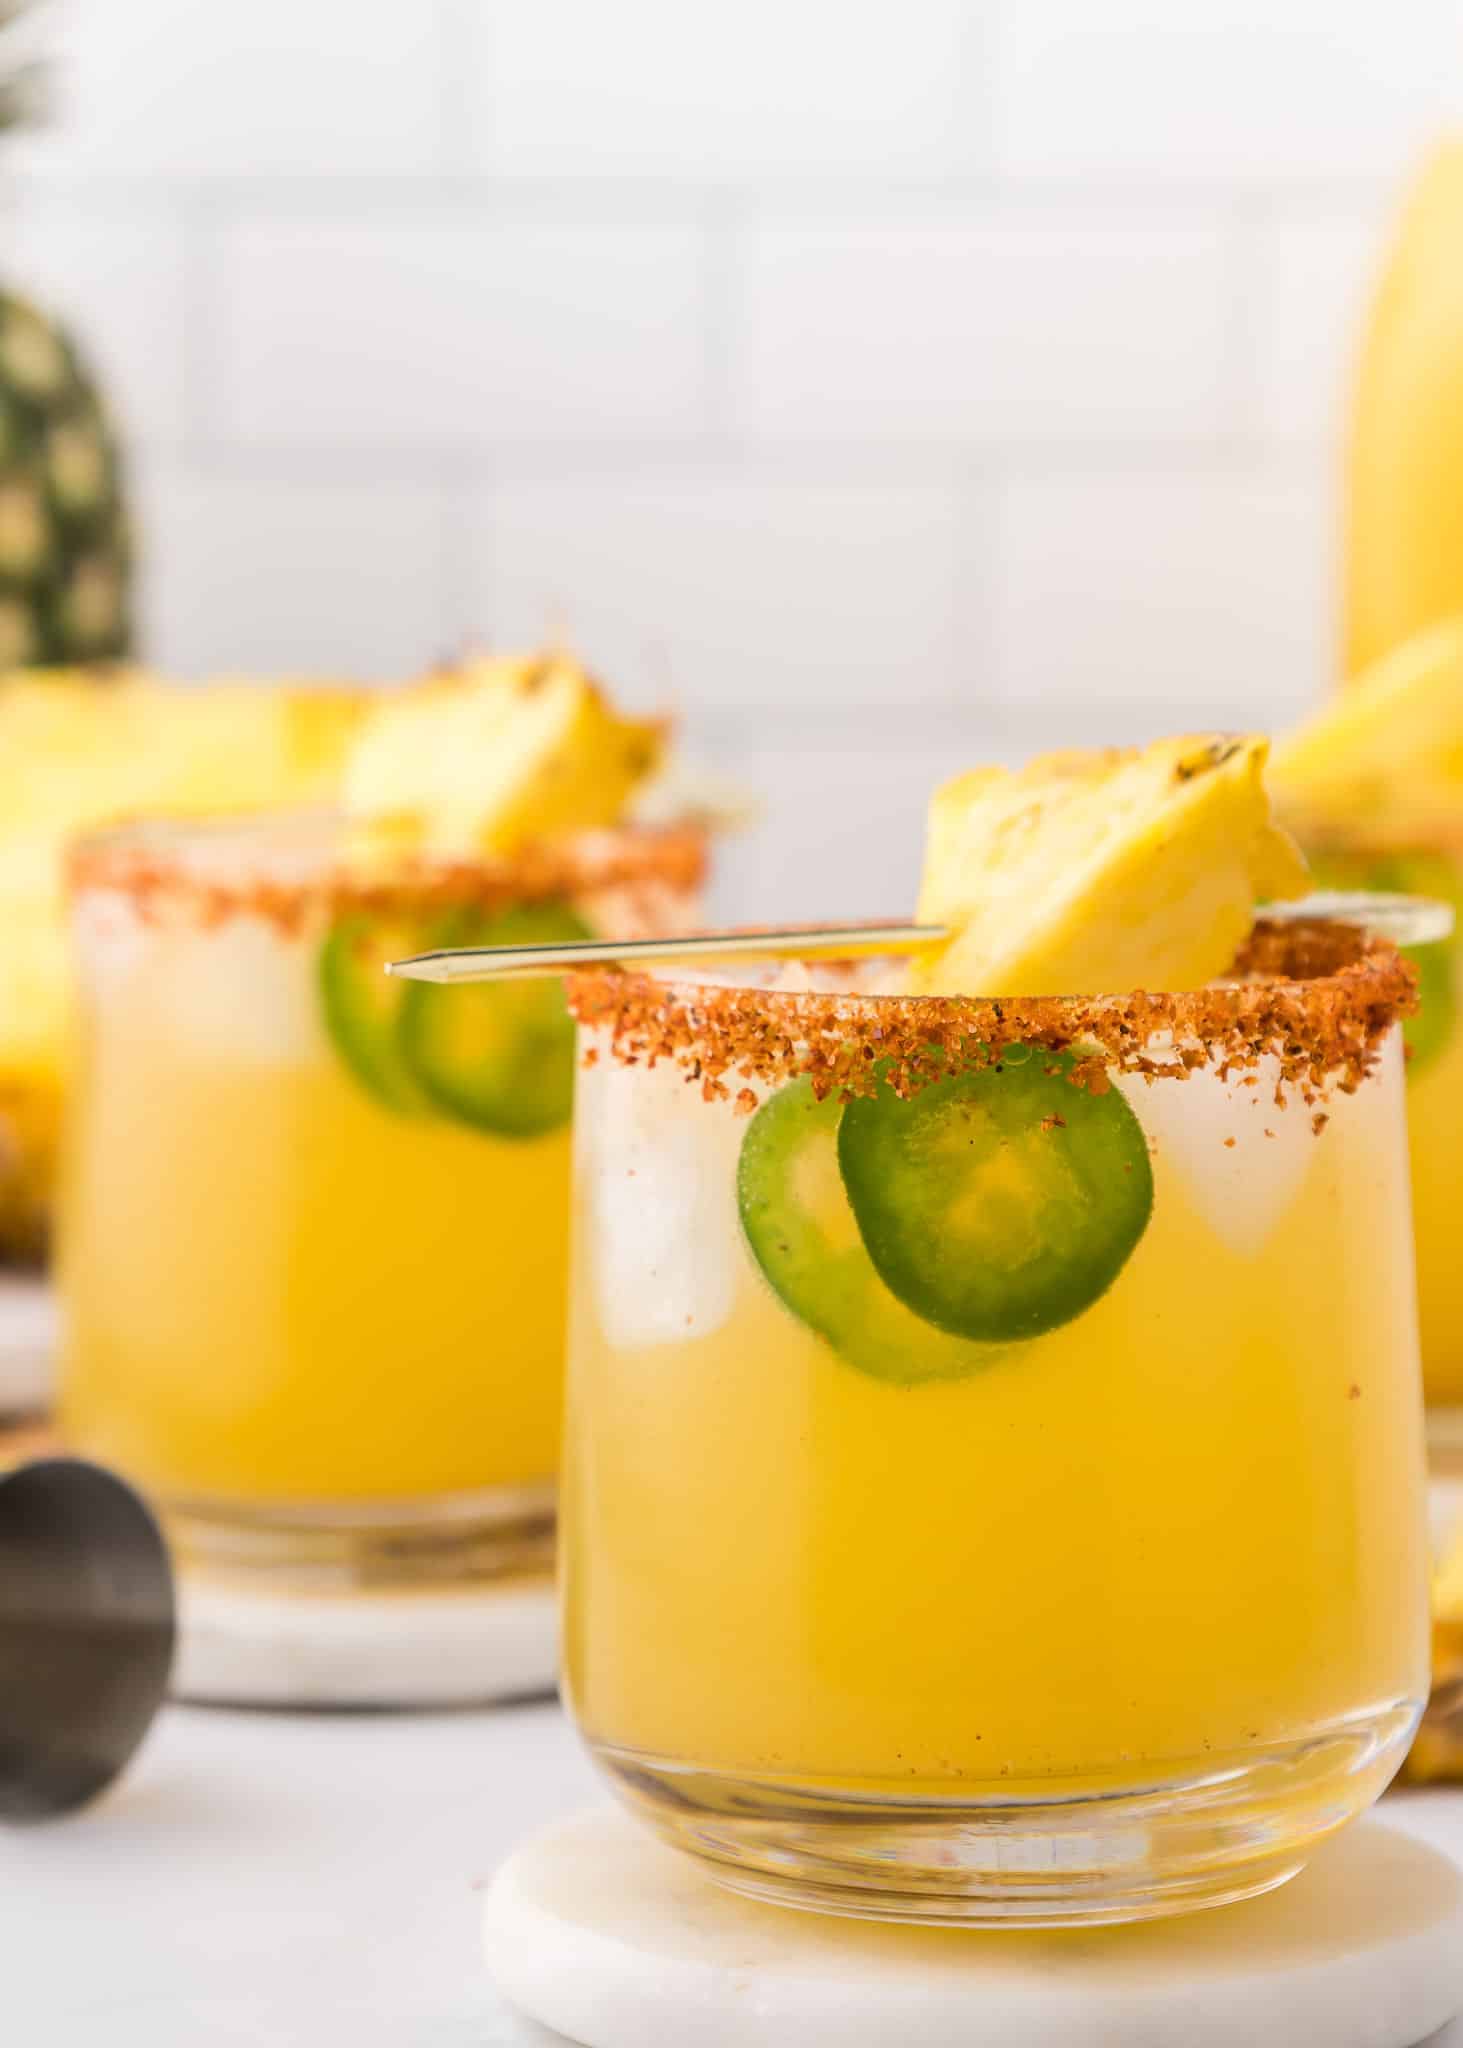 spicy mocktail recipe: Spicy Pineapple Ginger Mocktail